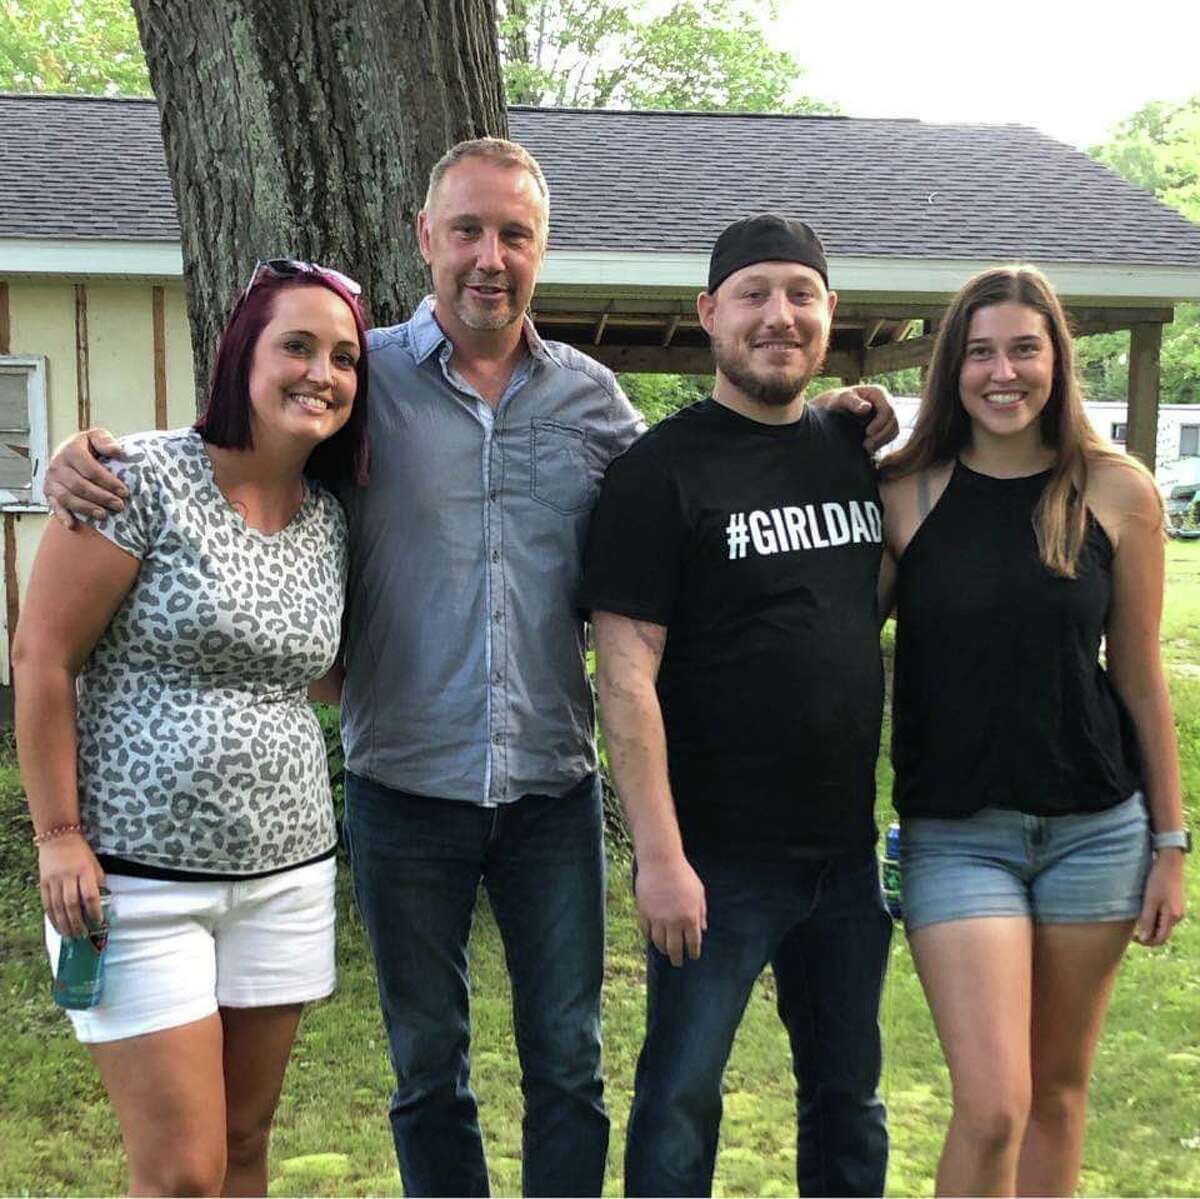 Tony Iafrate is pictured with his children (from left) Linda, Jeremy, and Gracie.